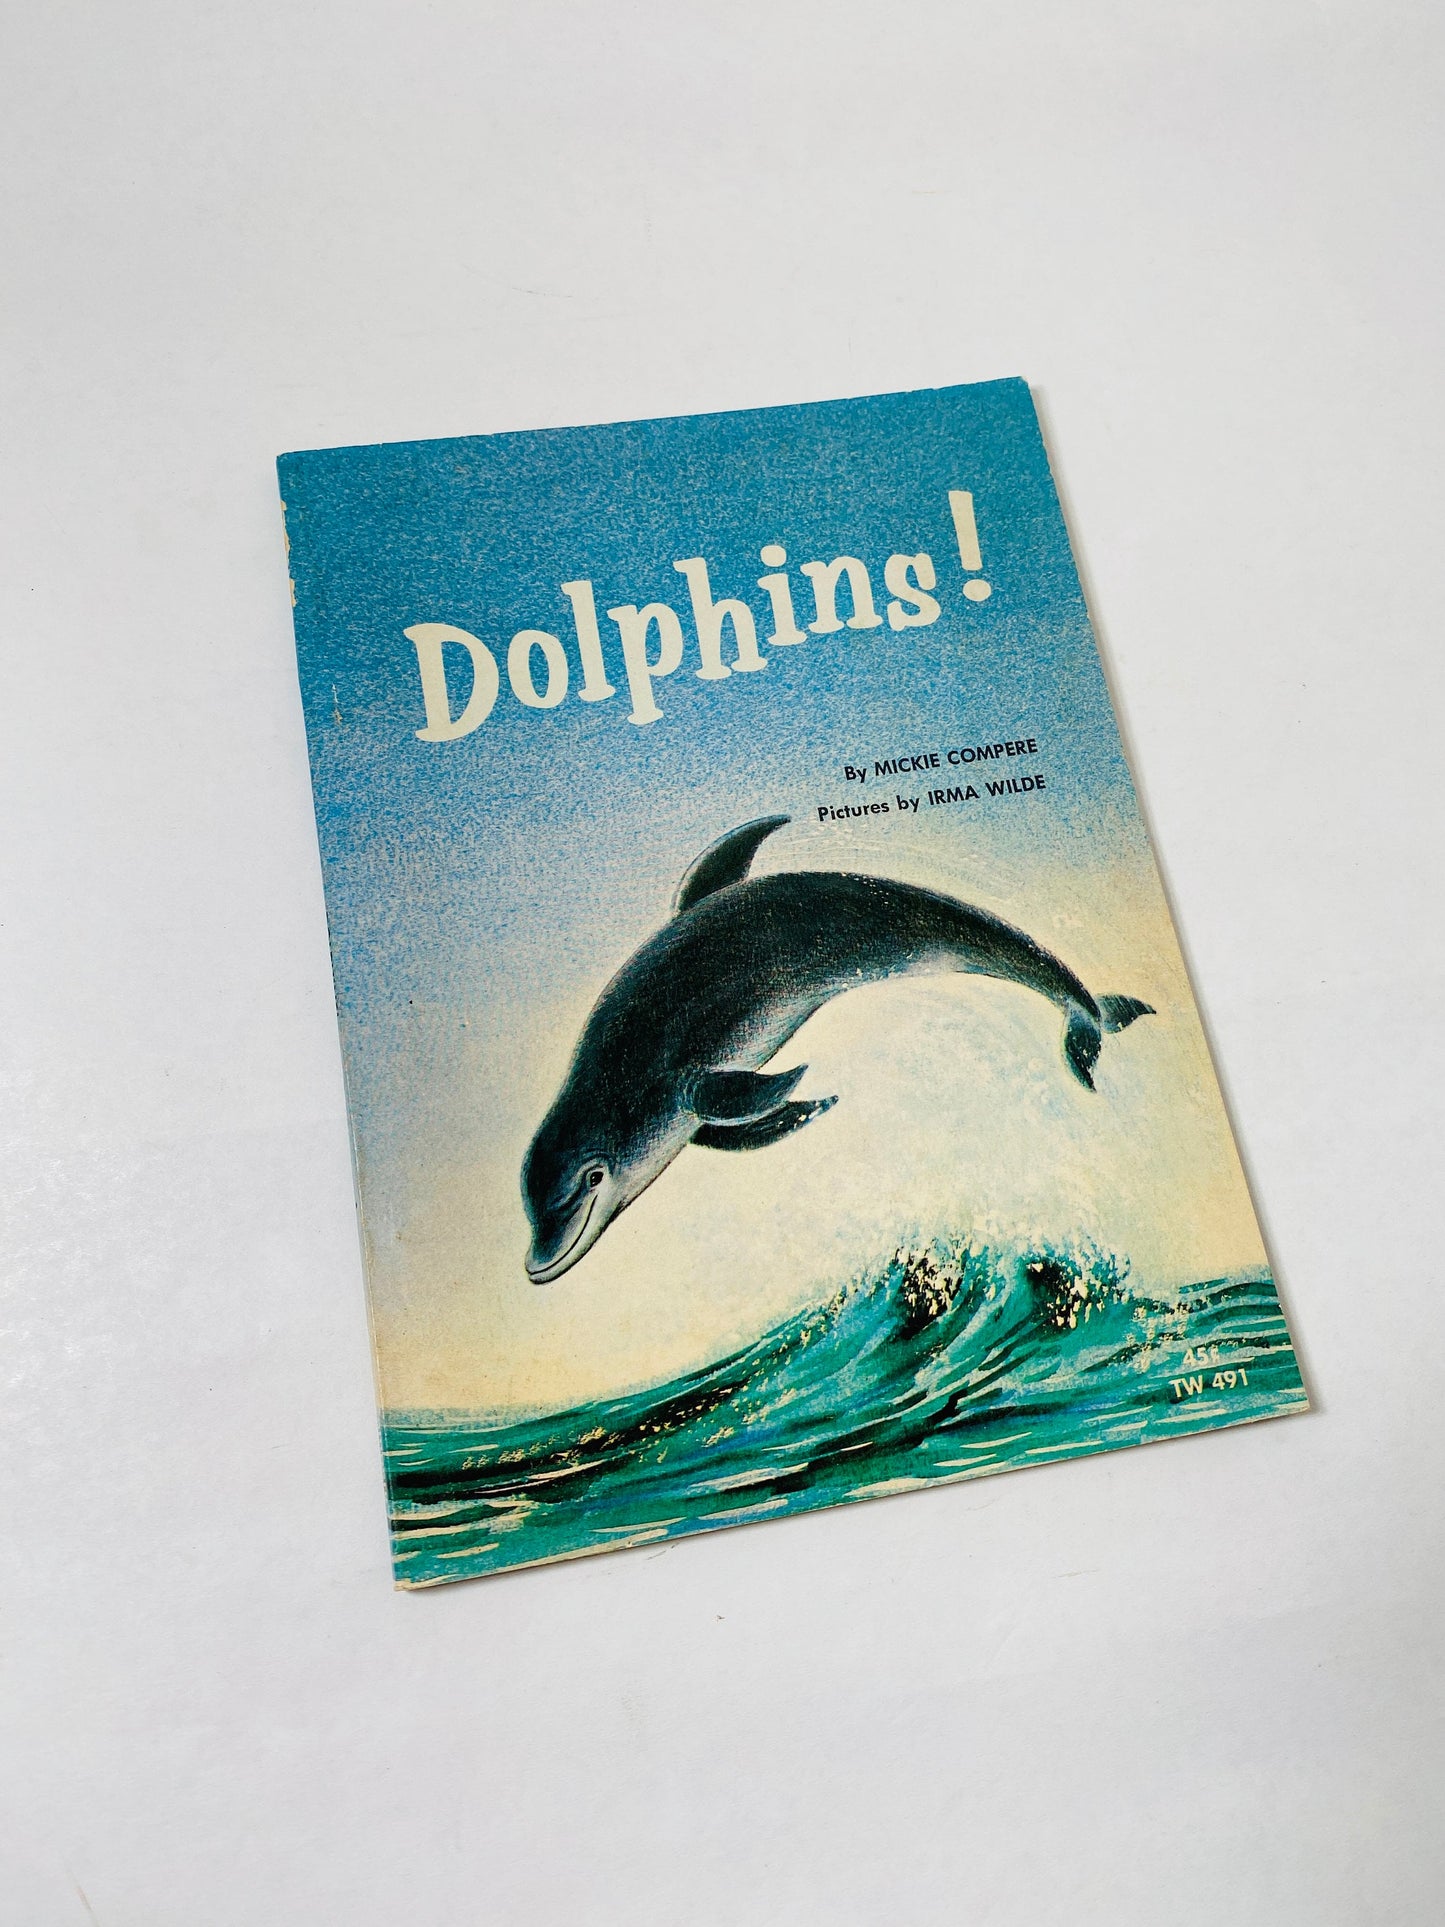 1966 Dolphins! vintage Scholastic paperback picture book. Home decor prop by Mickie Compere